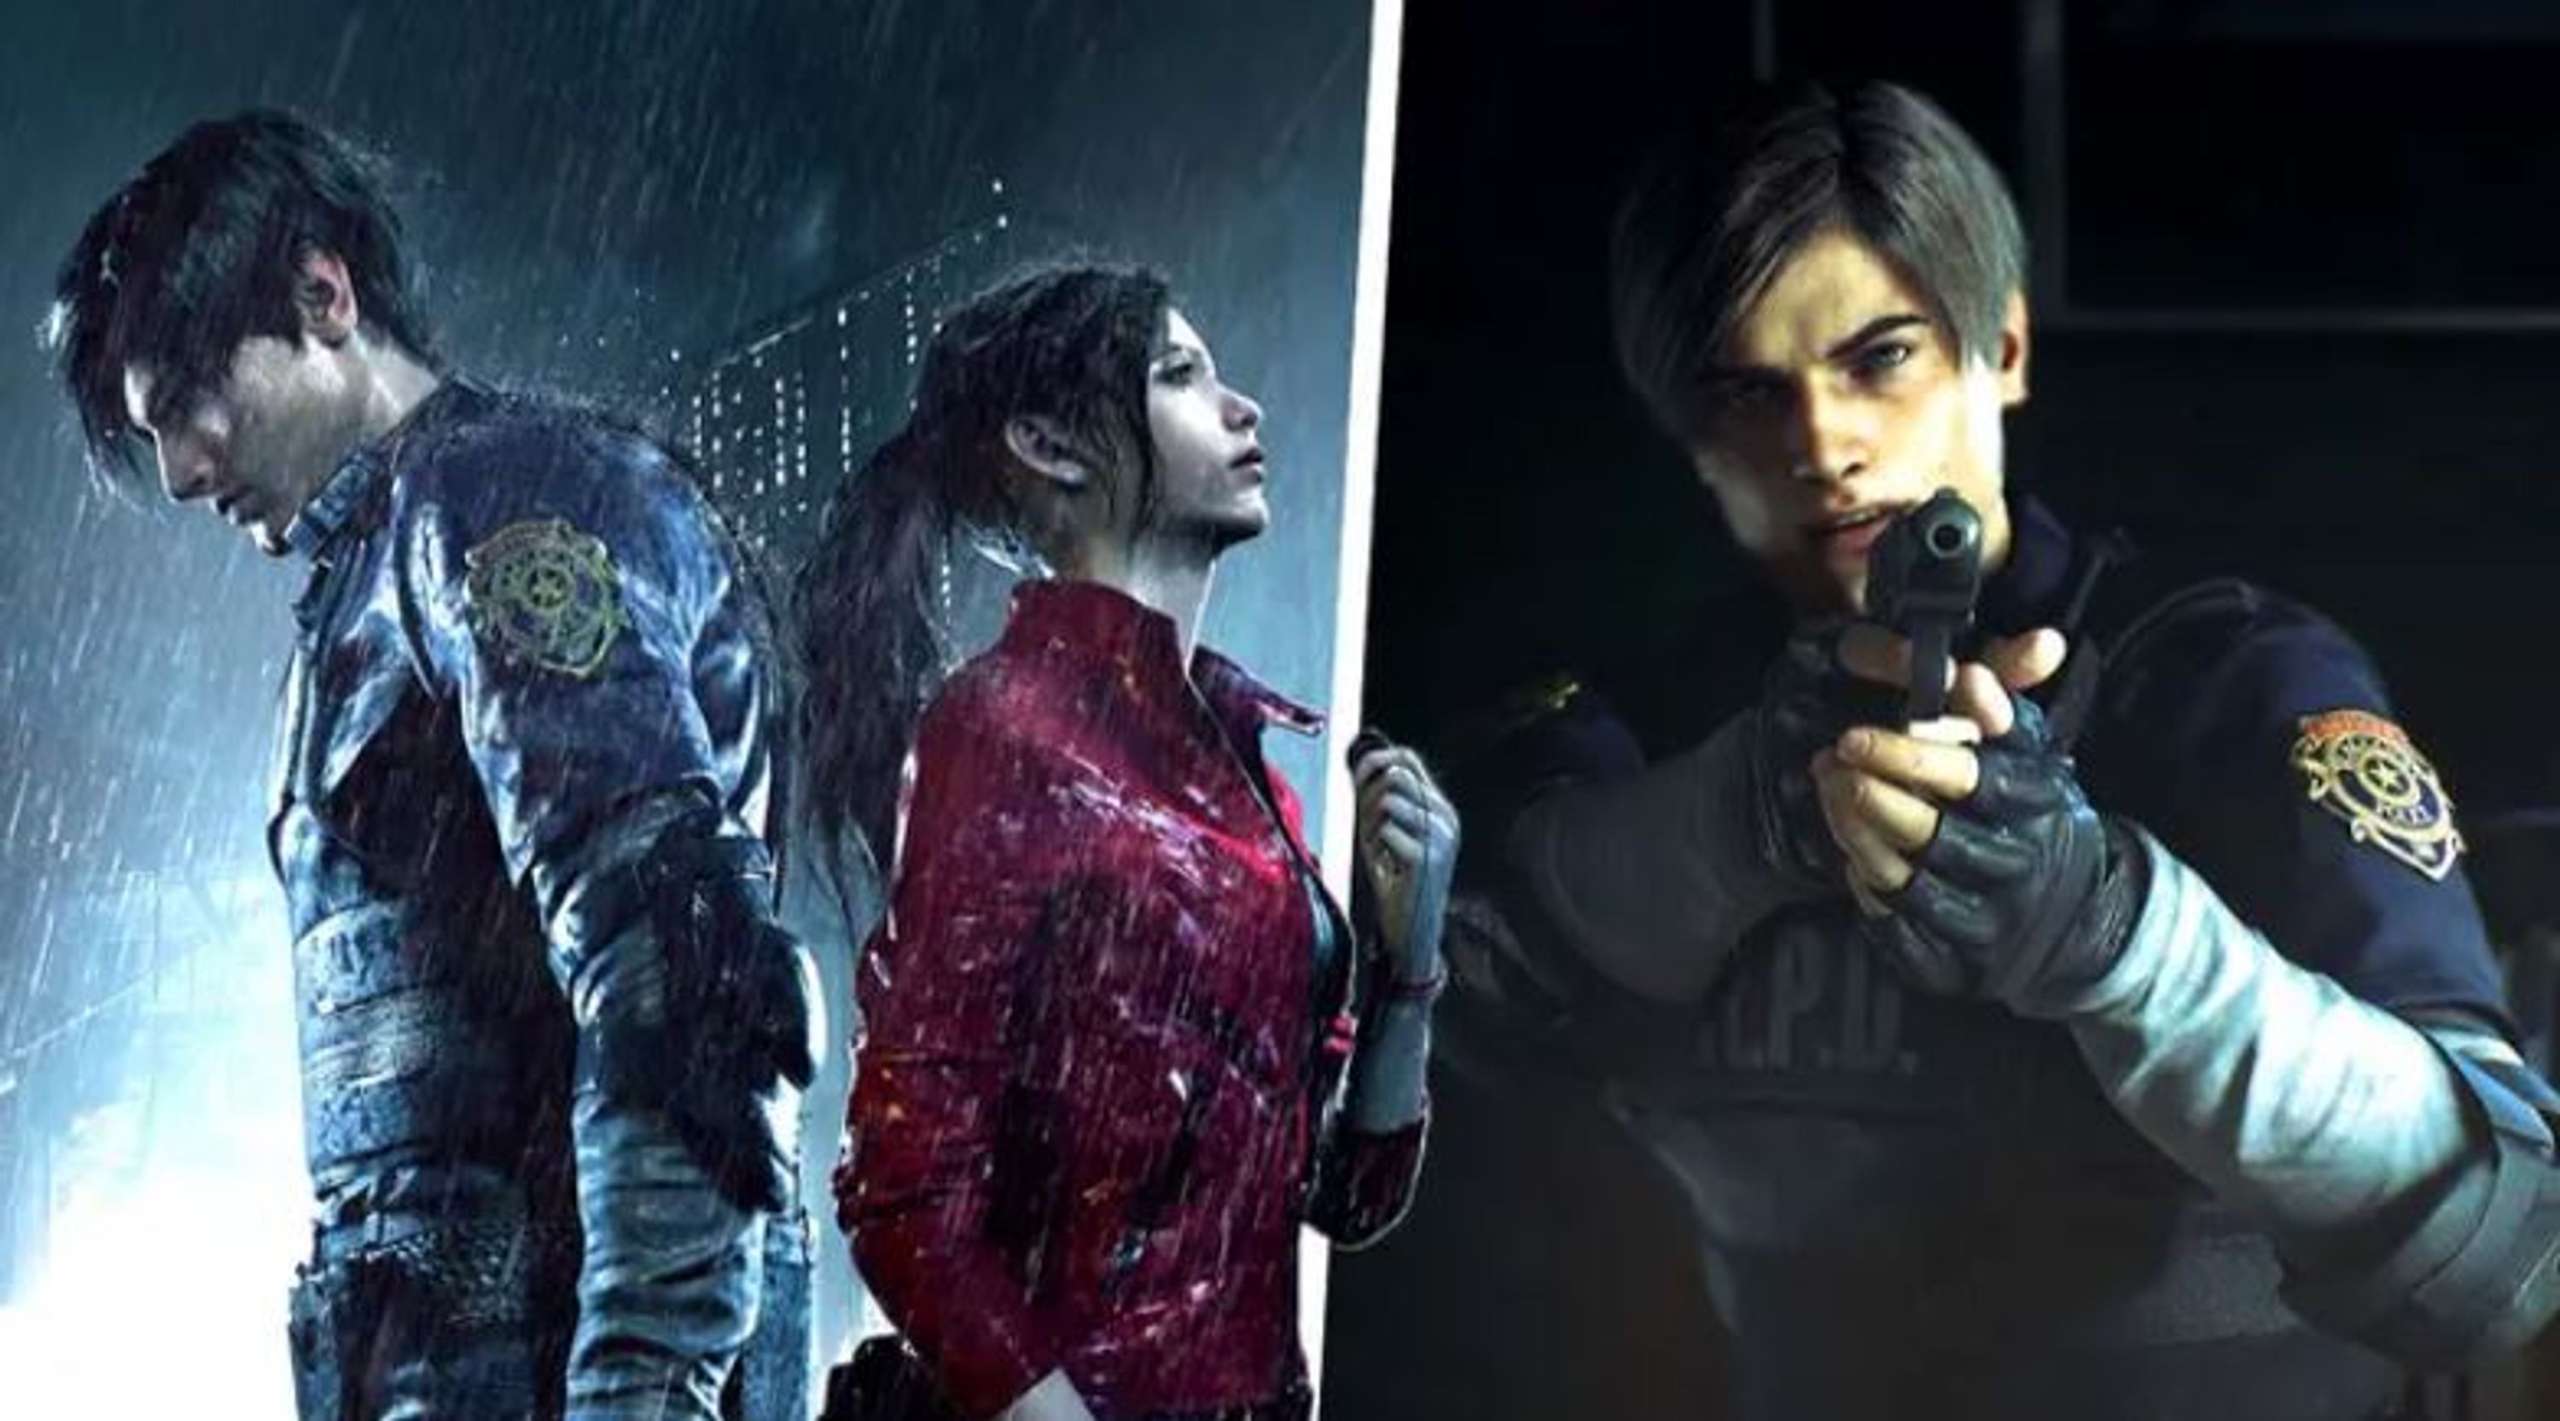 According To Capcom’s Official Statement, Resident Evil 2 Remastered Has Sold Over 10 Million Copies Globally